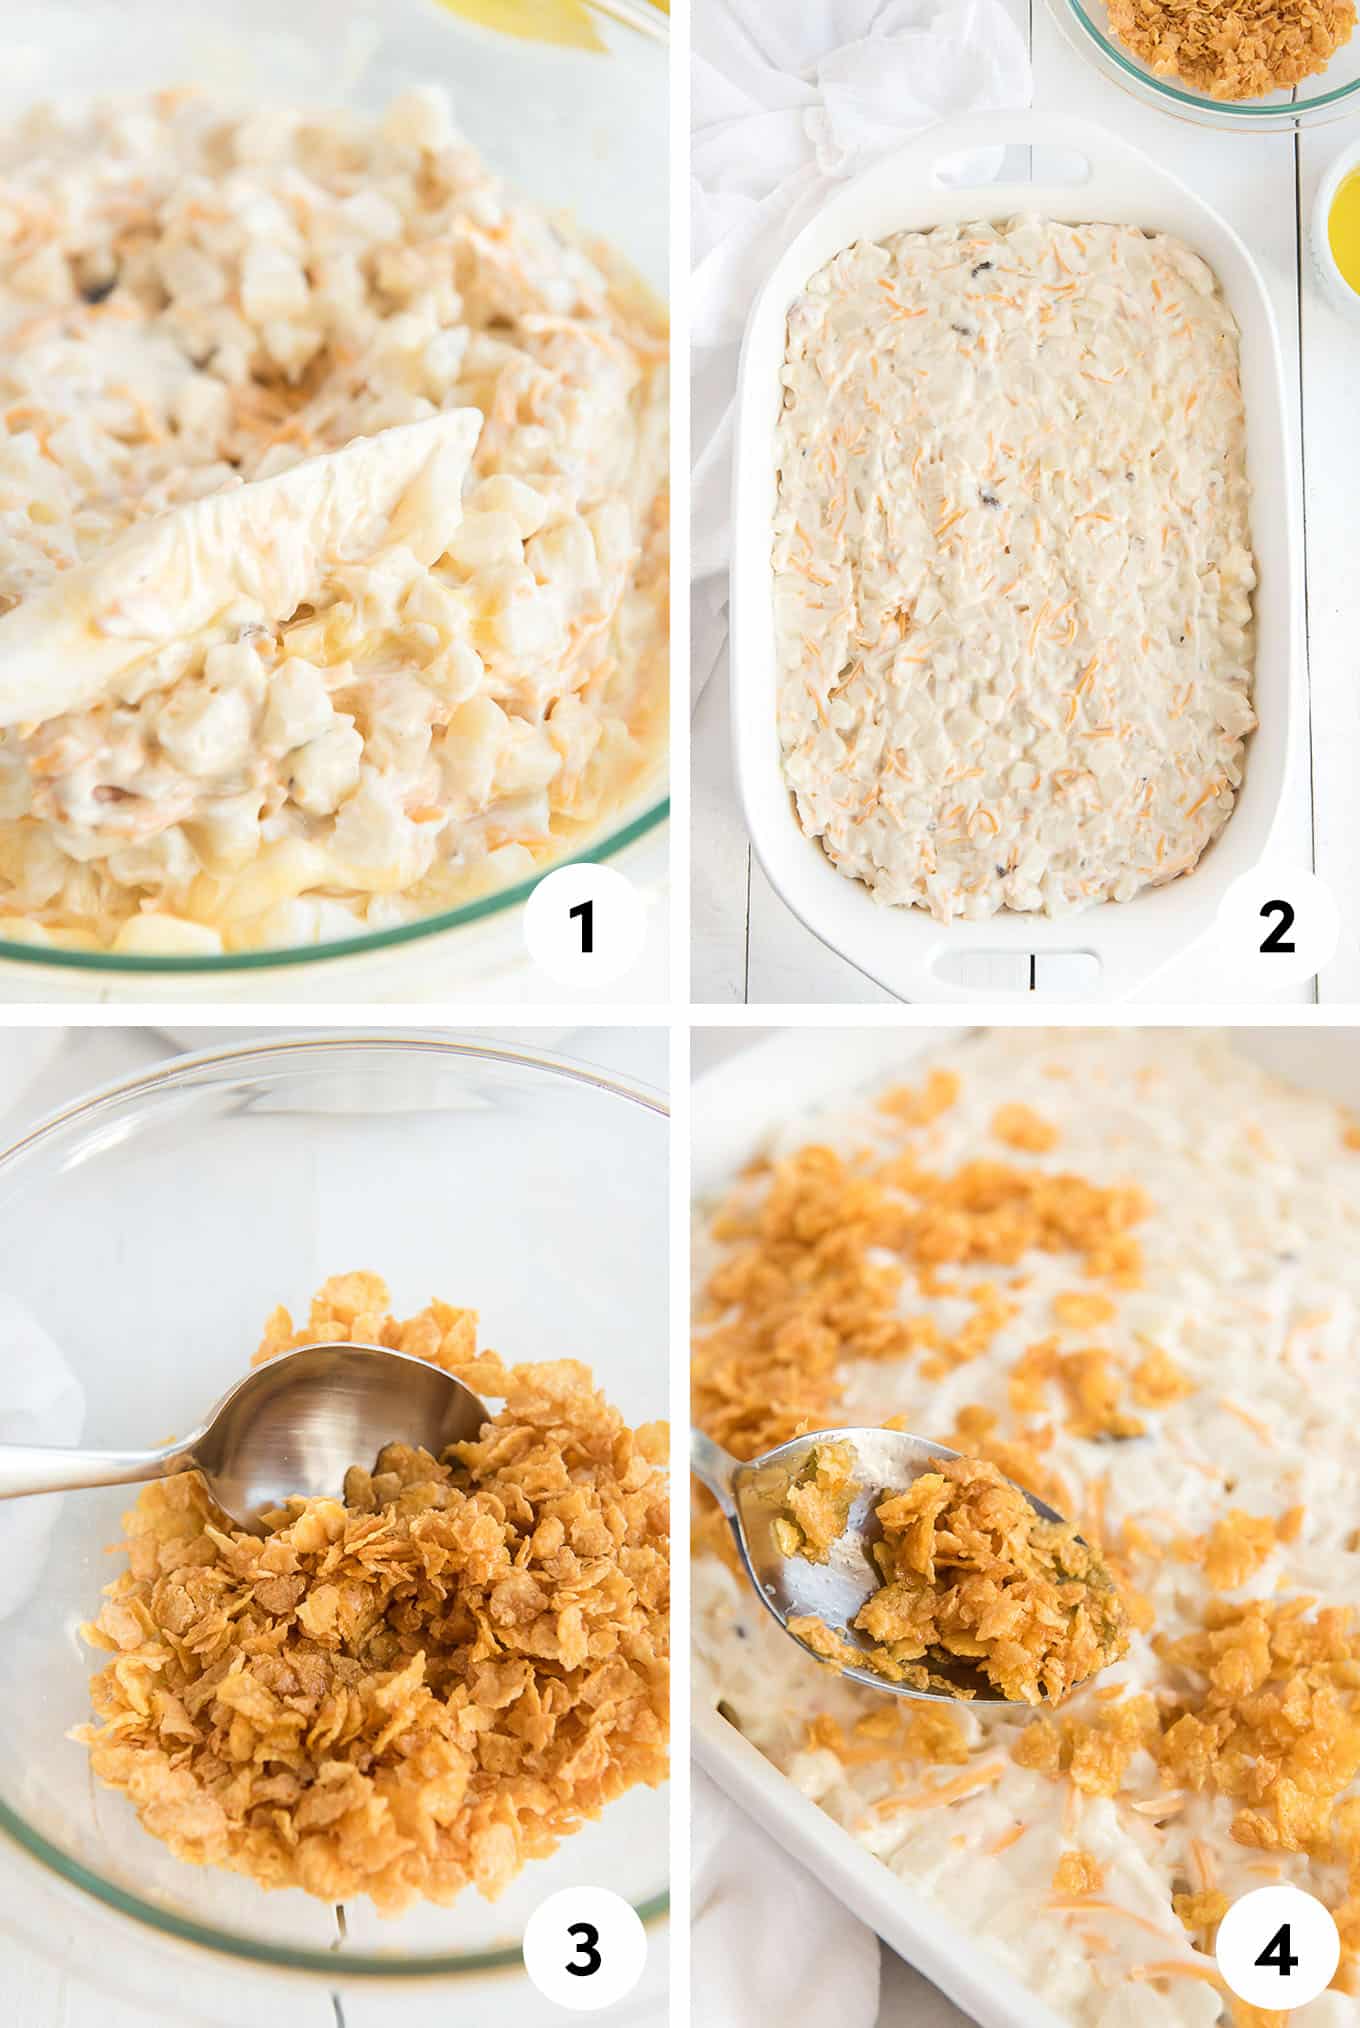 A collage of images showing mixing the ingredients together, in the baking dish, mixing the topping, and adding the corn flakes on top.